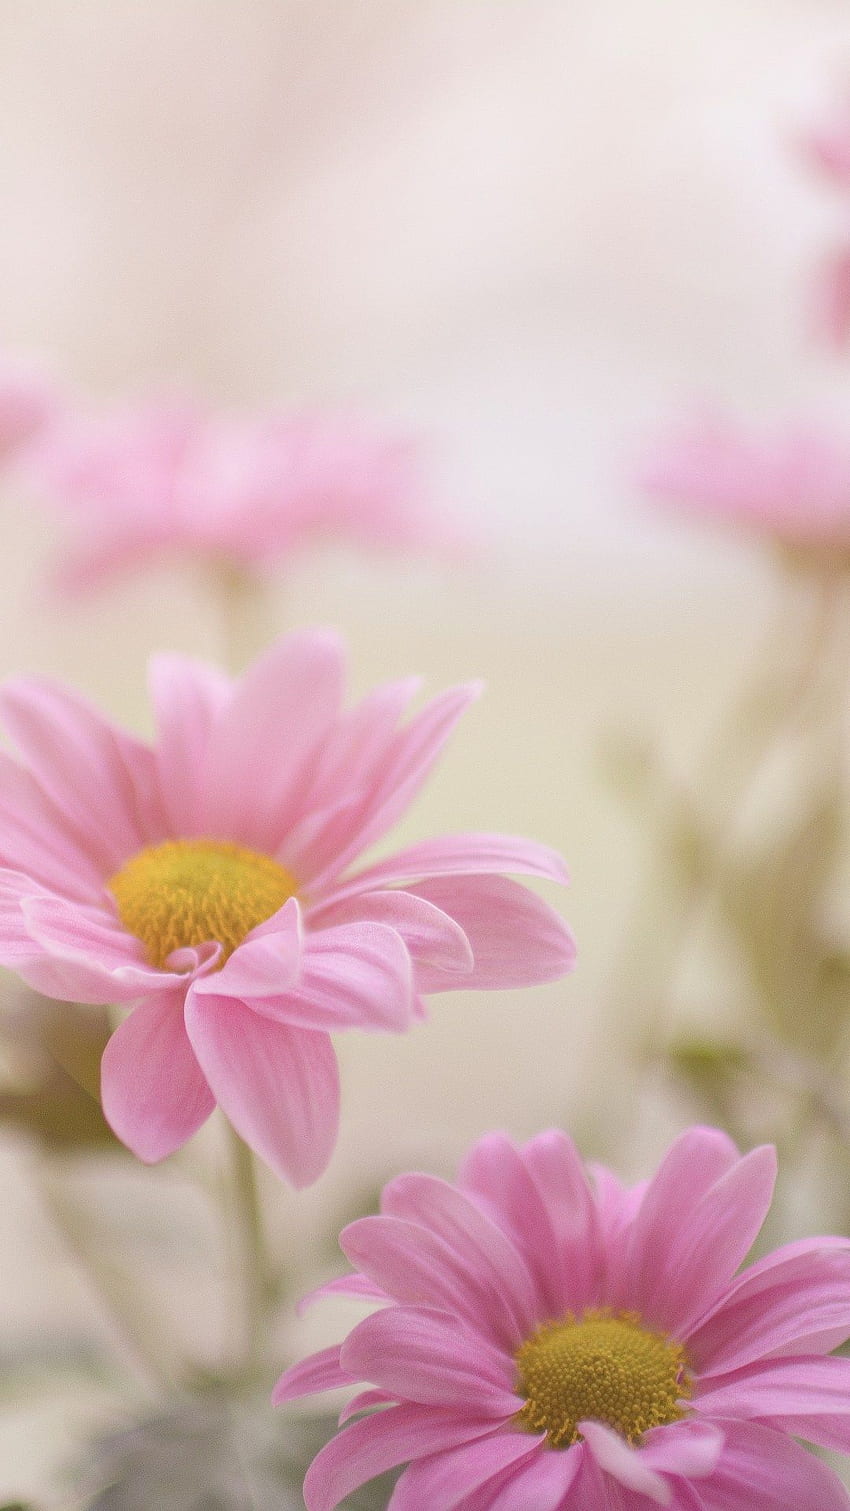 35 Pink Aesthetic Pictures : Daisy Pink Wallpaper iPhone - Idea